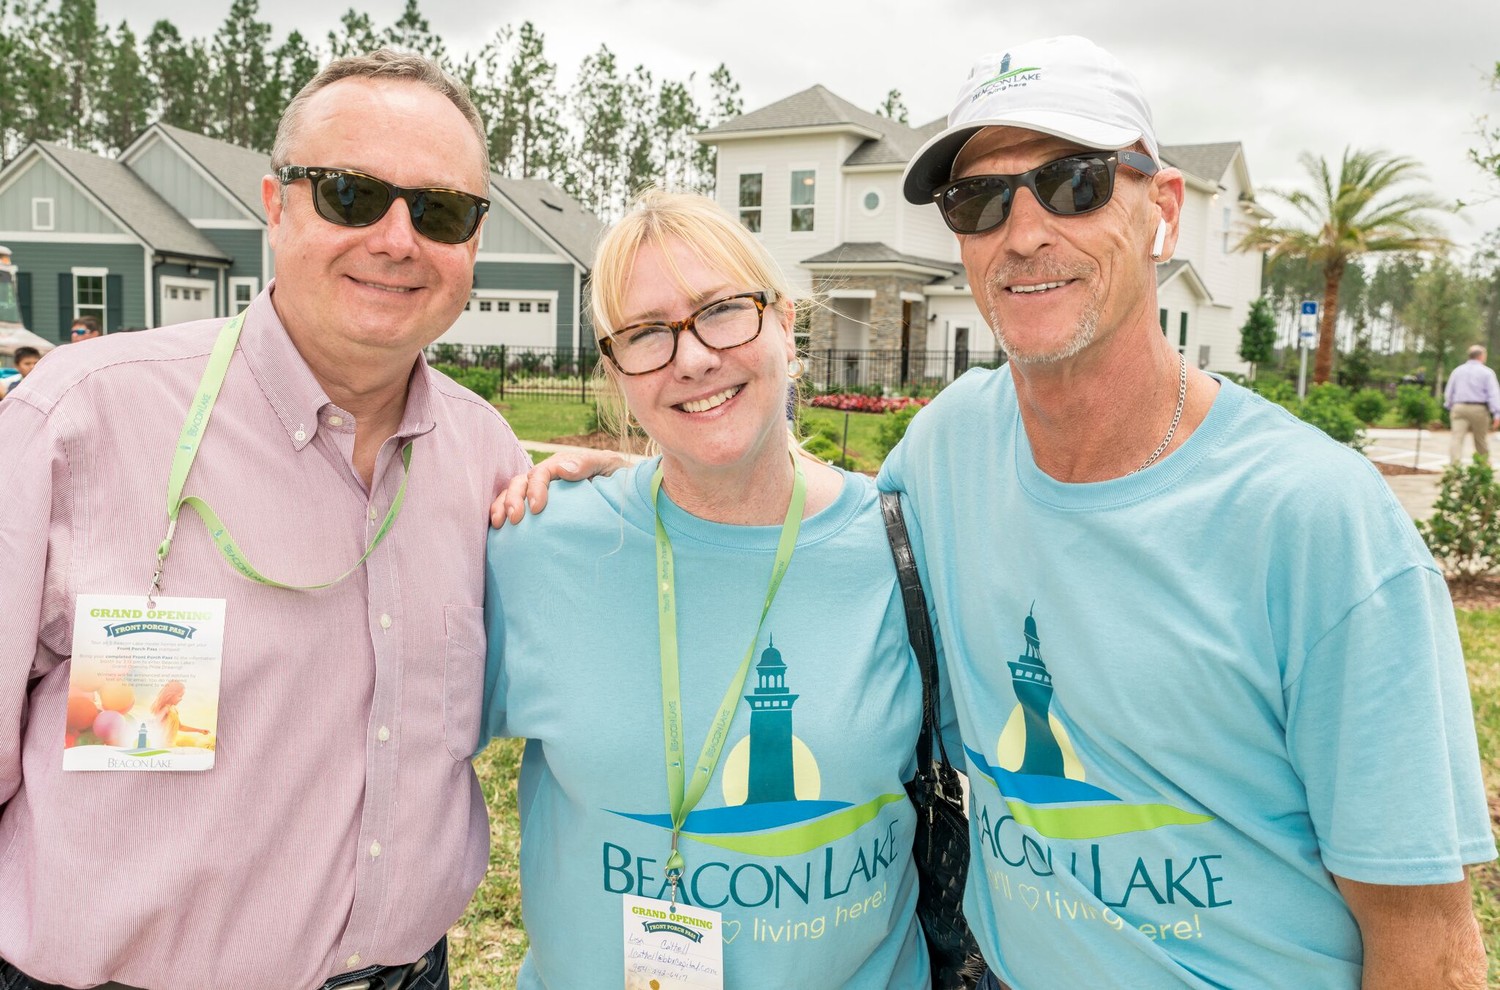 BBX Executives Blaz Kovacic, Lisa Cathell and Bruce Parker enjoy the Beacon Lake grand opening event on April 21.